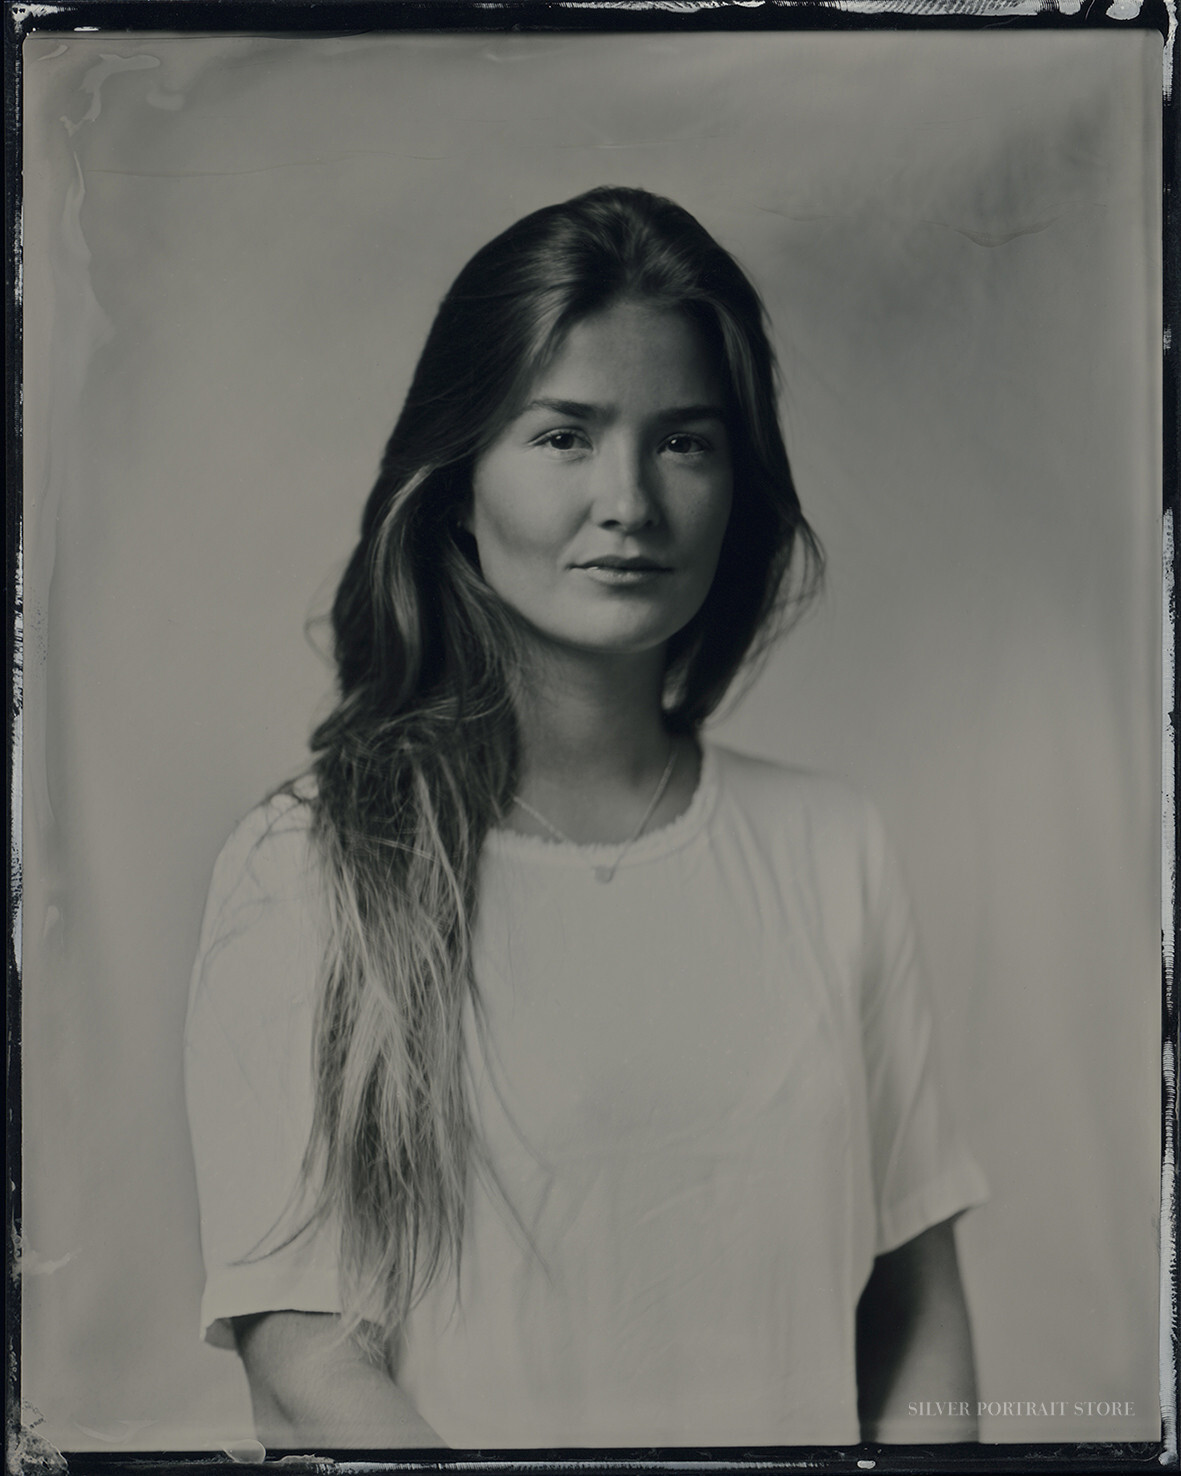 Maria-Silver Portrait Store-Scan from Wet plate collodion-Tintype 10 x 12 cm.